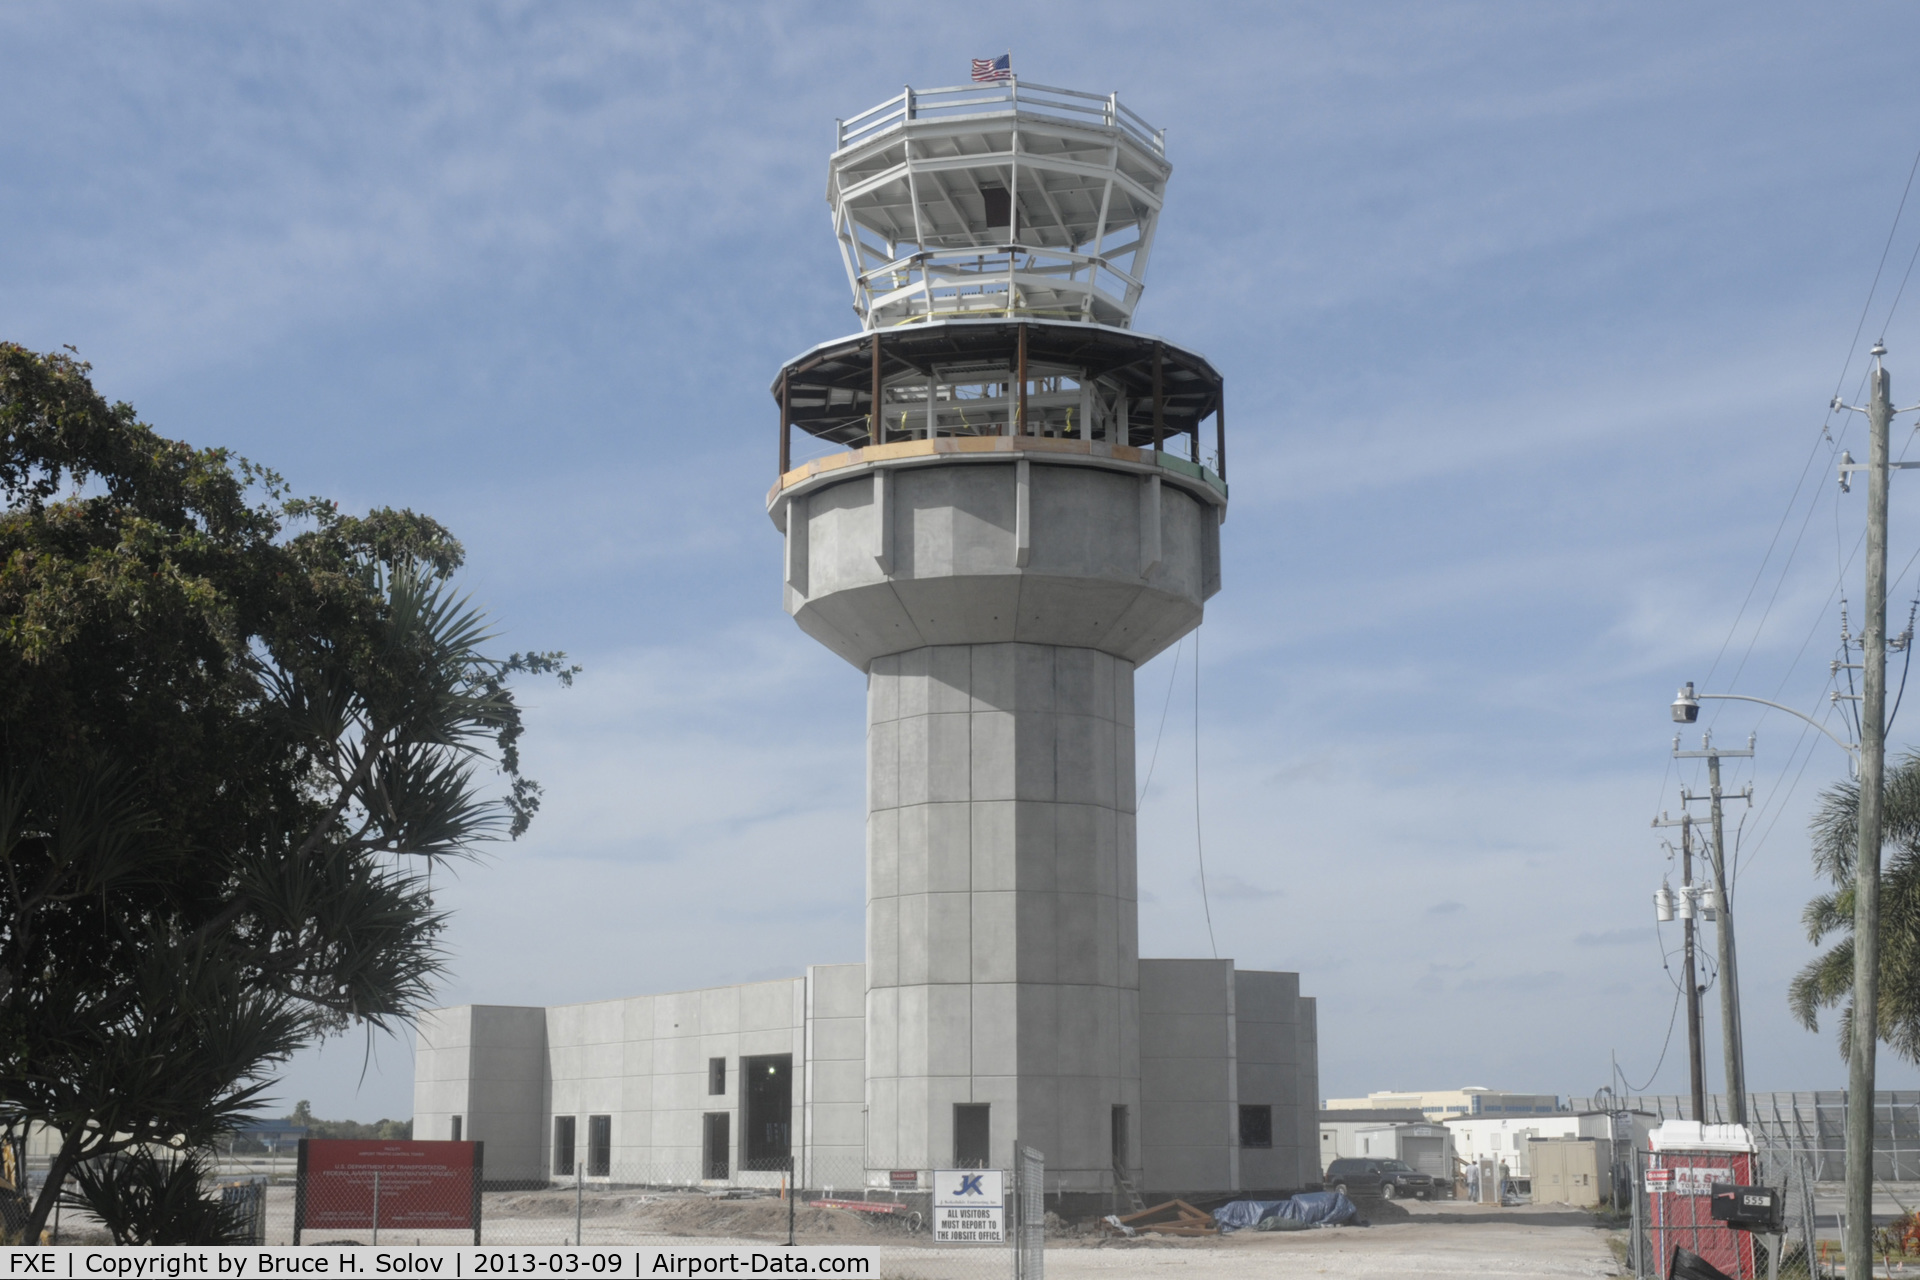 Fort Lauderdale Executive Airport (FXE) - The new ATC tower under construction at FXE